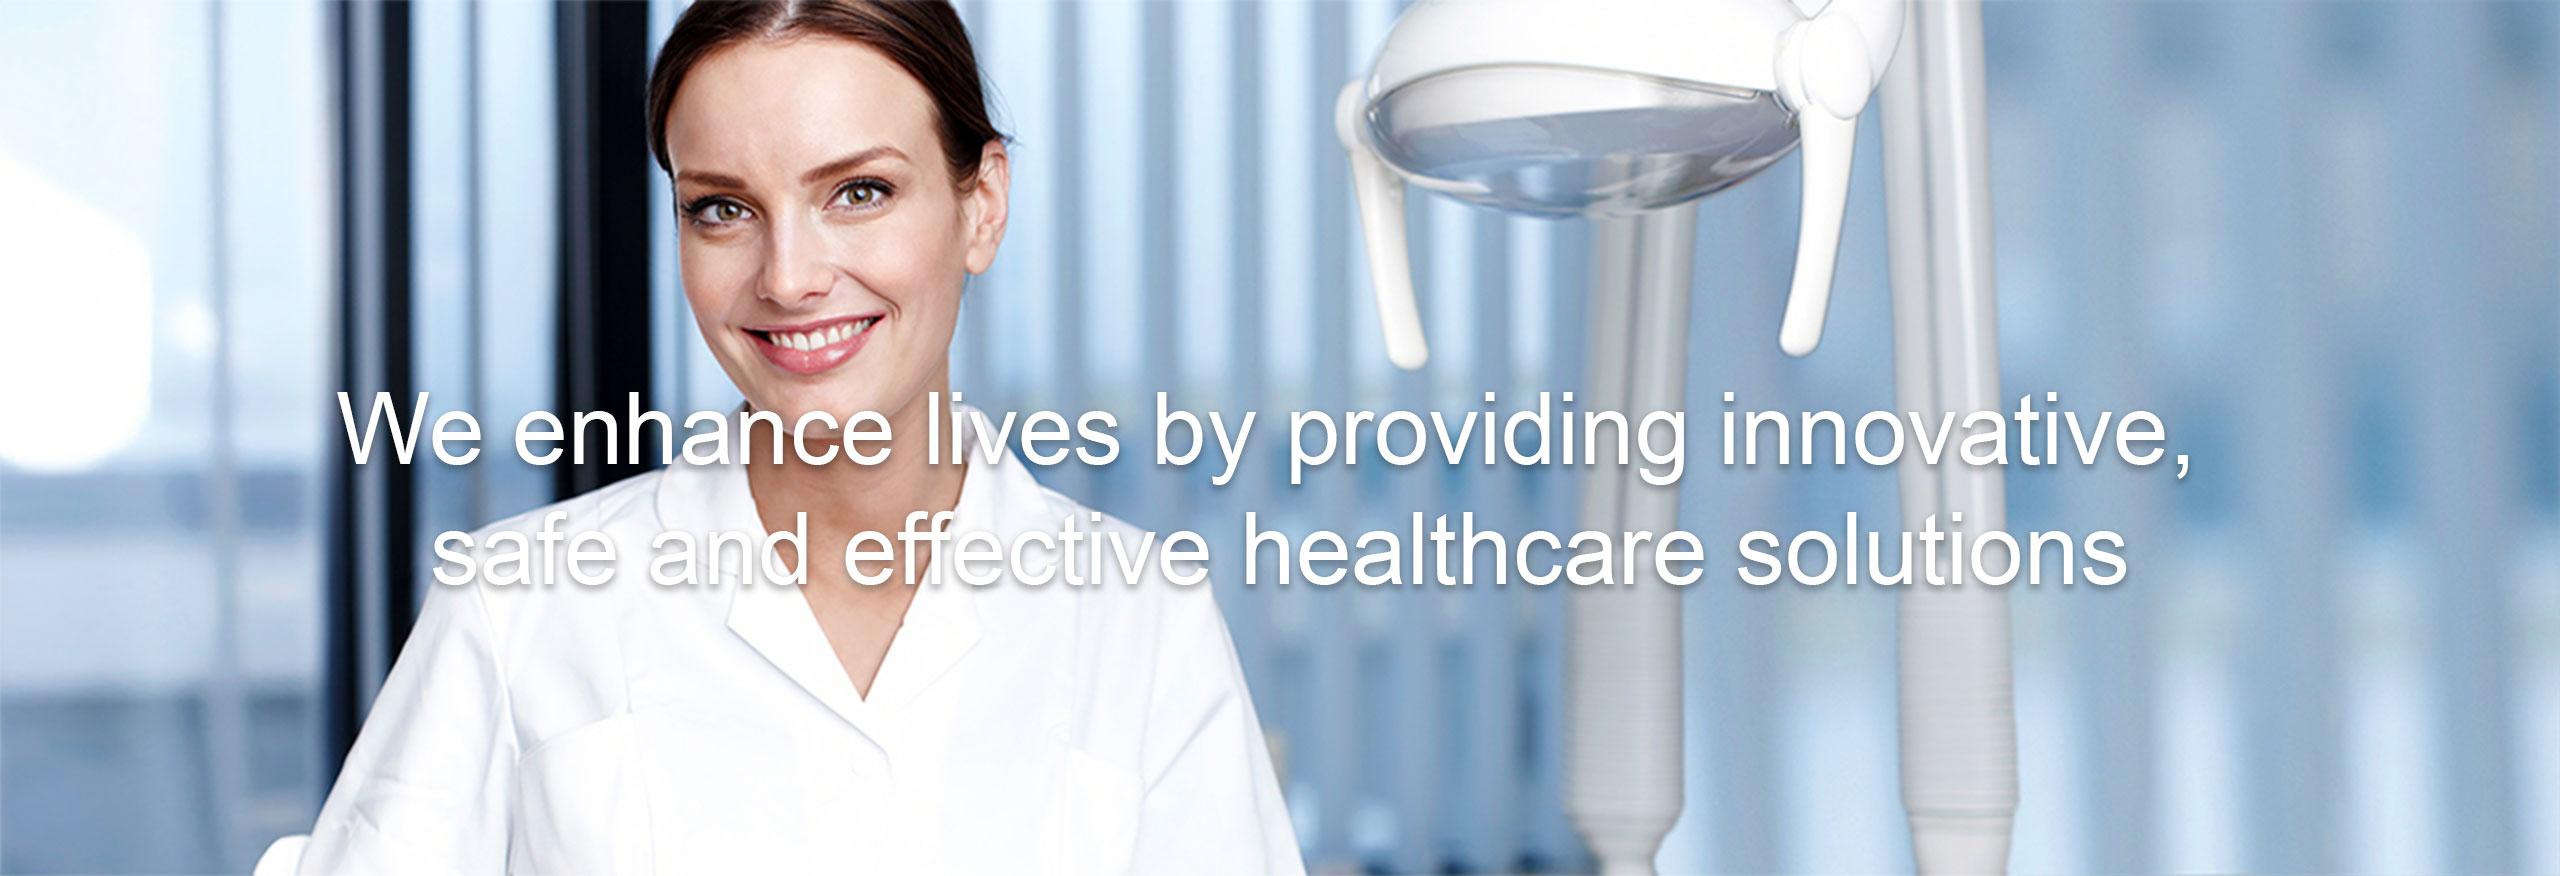 We enhance lives by providing innovative, safe and effective healthcare solutions